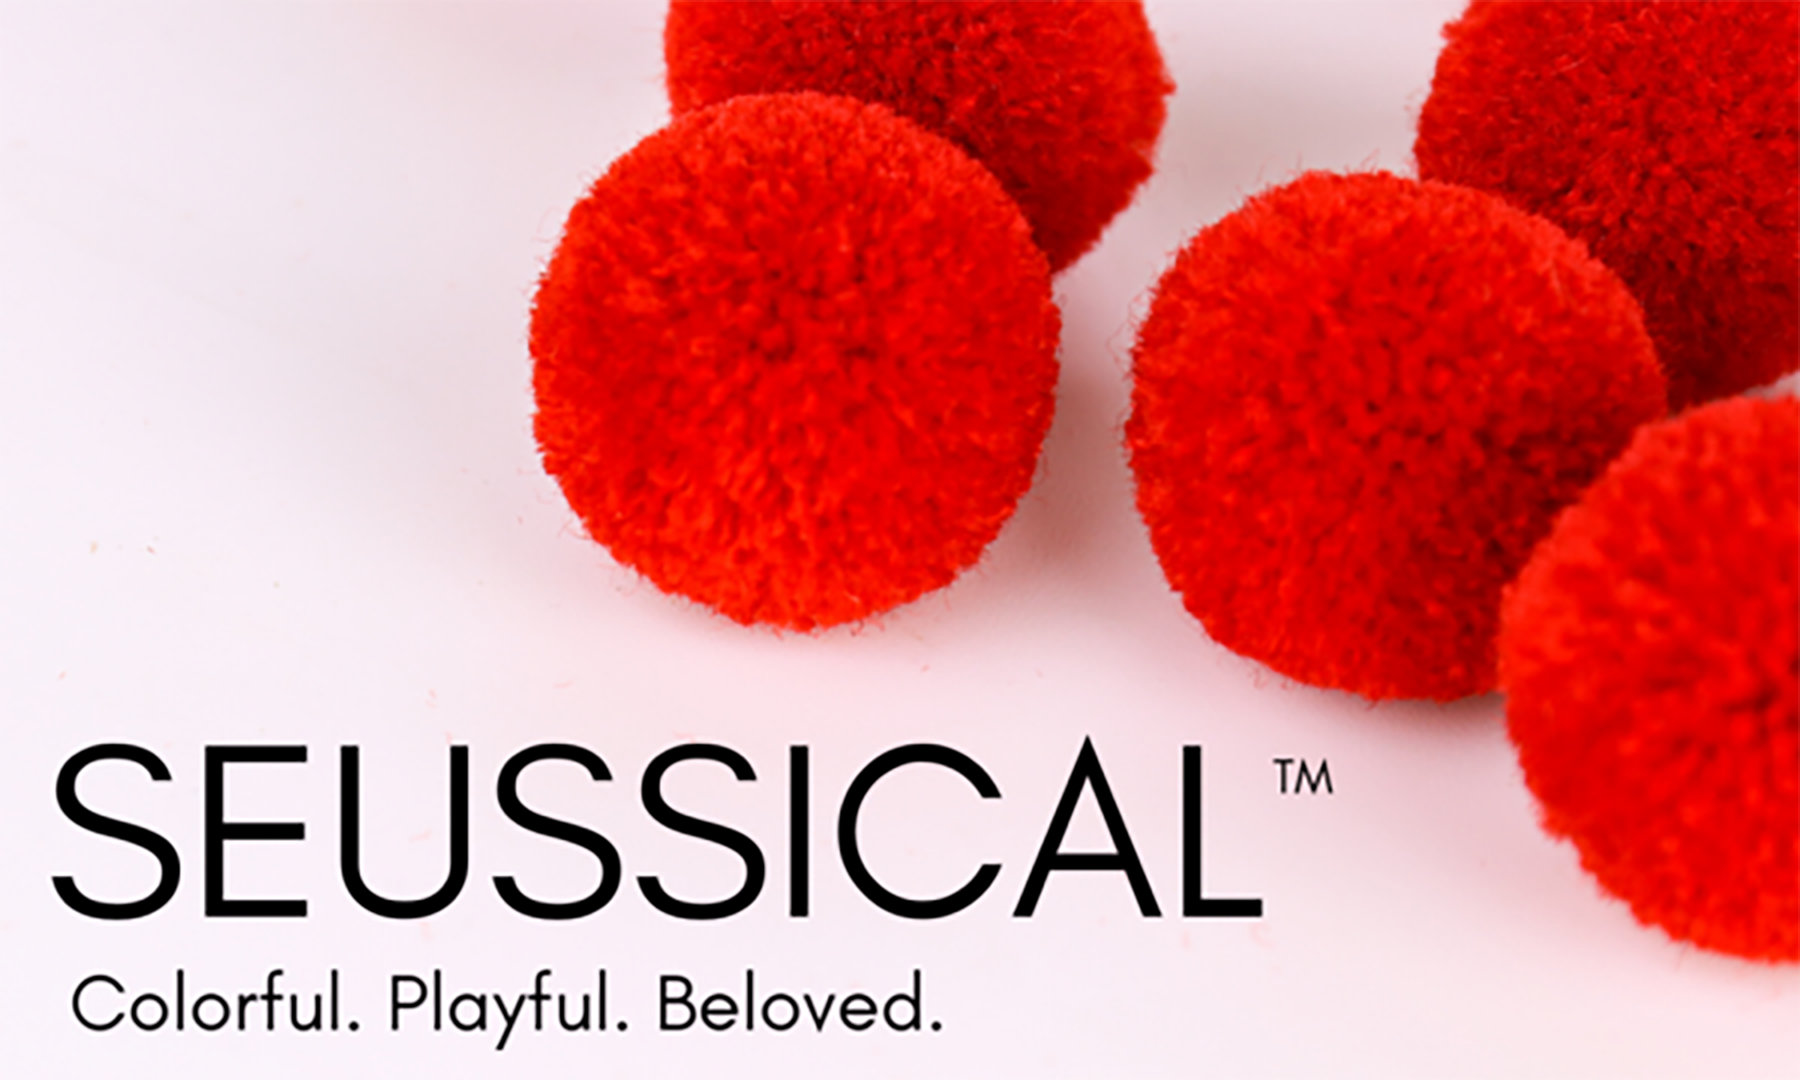 Seussical the Musical Performance – Weston Playhouse Theatre Company – SOLD OUT